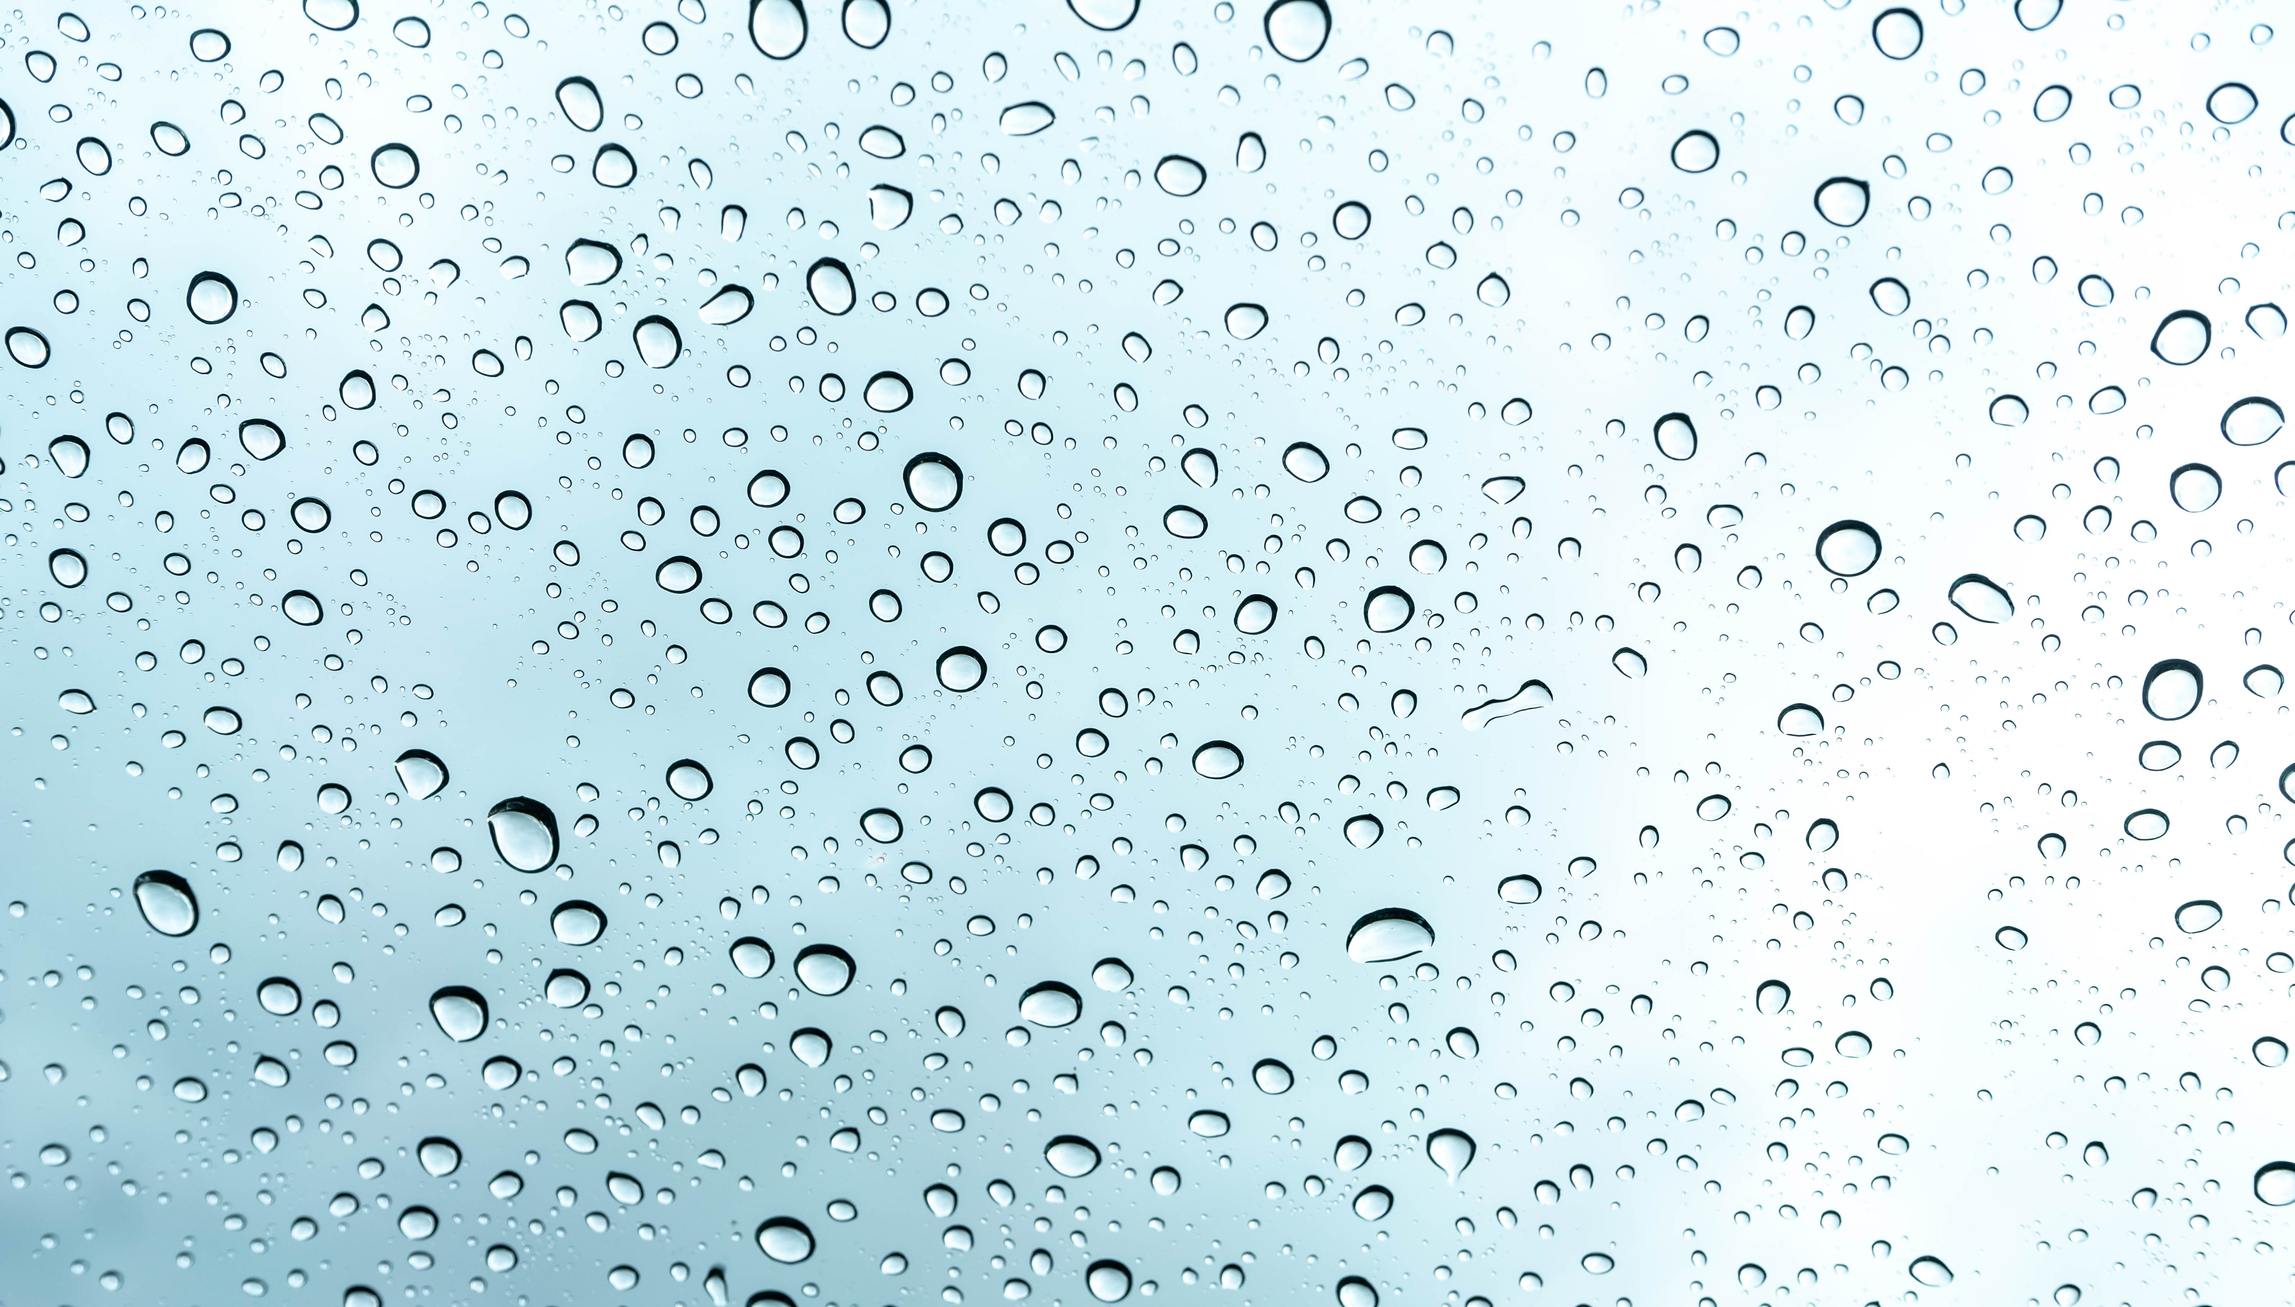 An image of water drops on glass in front of a light blue background.